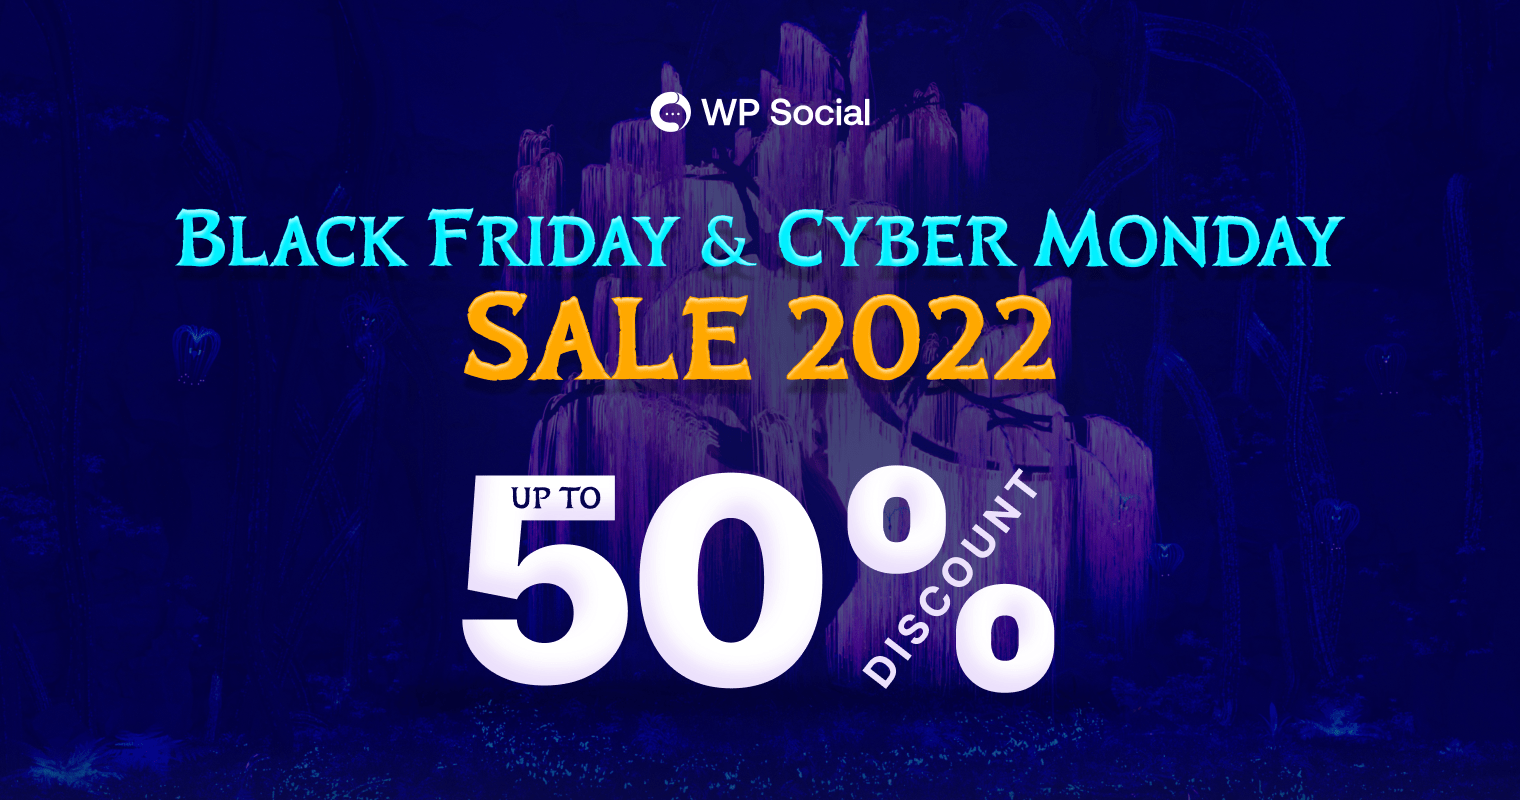 WP Social Black Friday and Cyber Monday Deal 2022